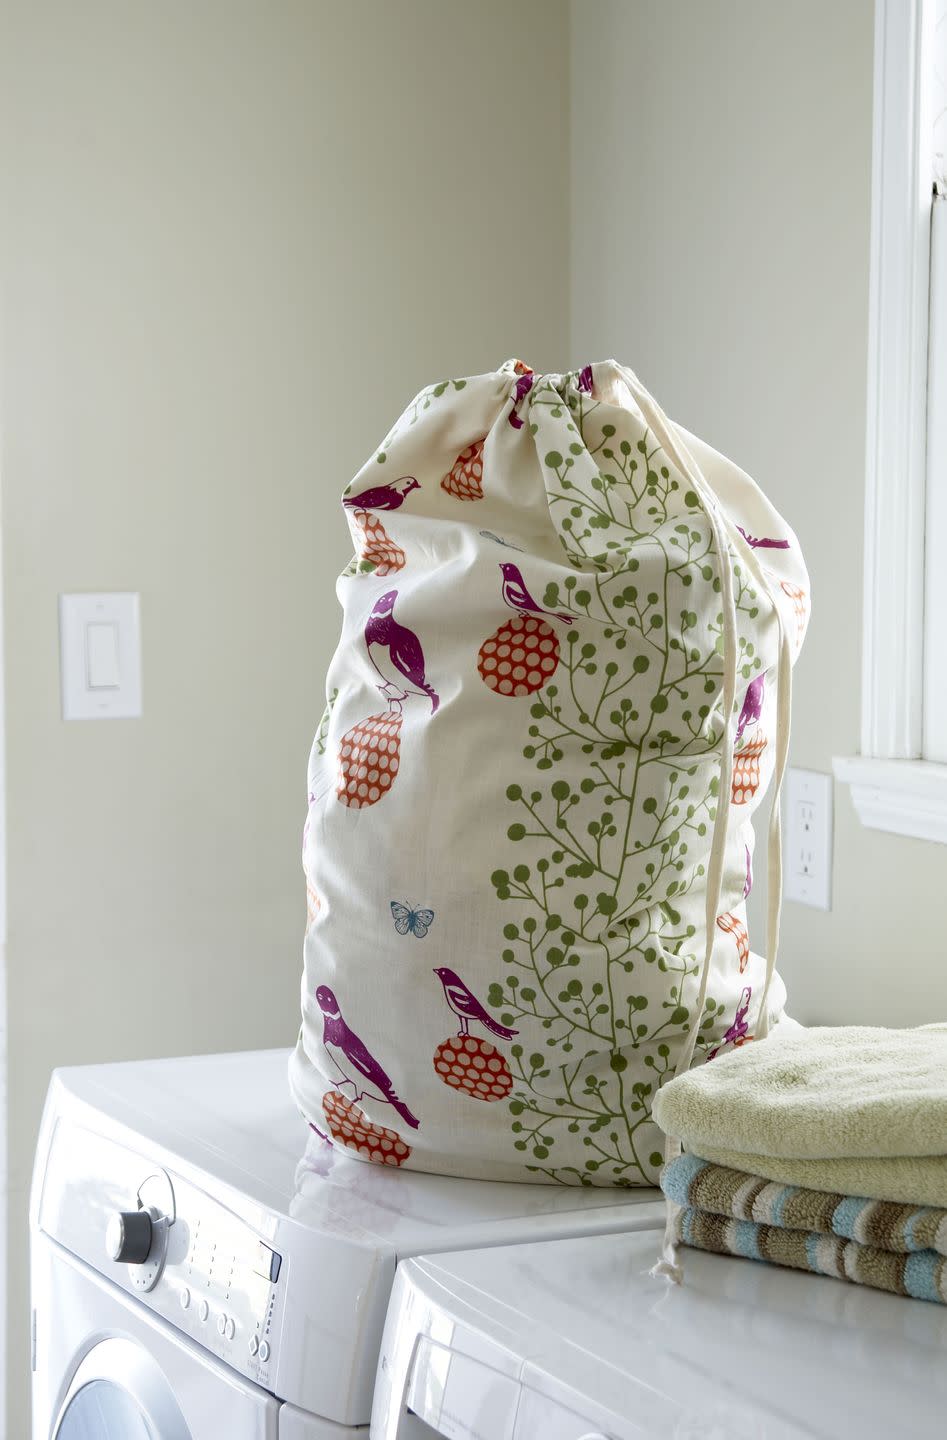 <p>Instead of a laundry bin in the bathroom, invest in a set of drawstring cotton laundry bags (buy from <a href="https://www.amazon.co.uk/s?k=drawstring+cotton+laundry+bag&ref=nb_sb_noss" rel="nofollow noopener" target="_blank" data-ylk="slk:Amazon" class="link rapid-noclick-resp">Amazon</a>) to hang on the back of every bedroom door. This avoids dirty clothes piling up on the floor and is also more hygienic, as the bags can be washed too. </p>